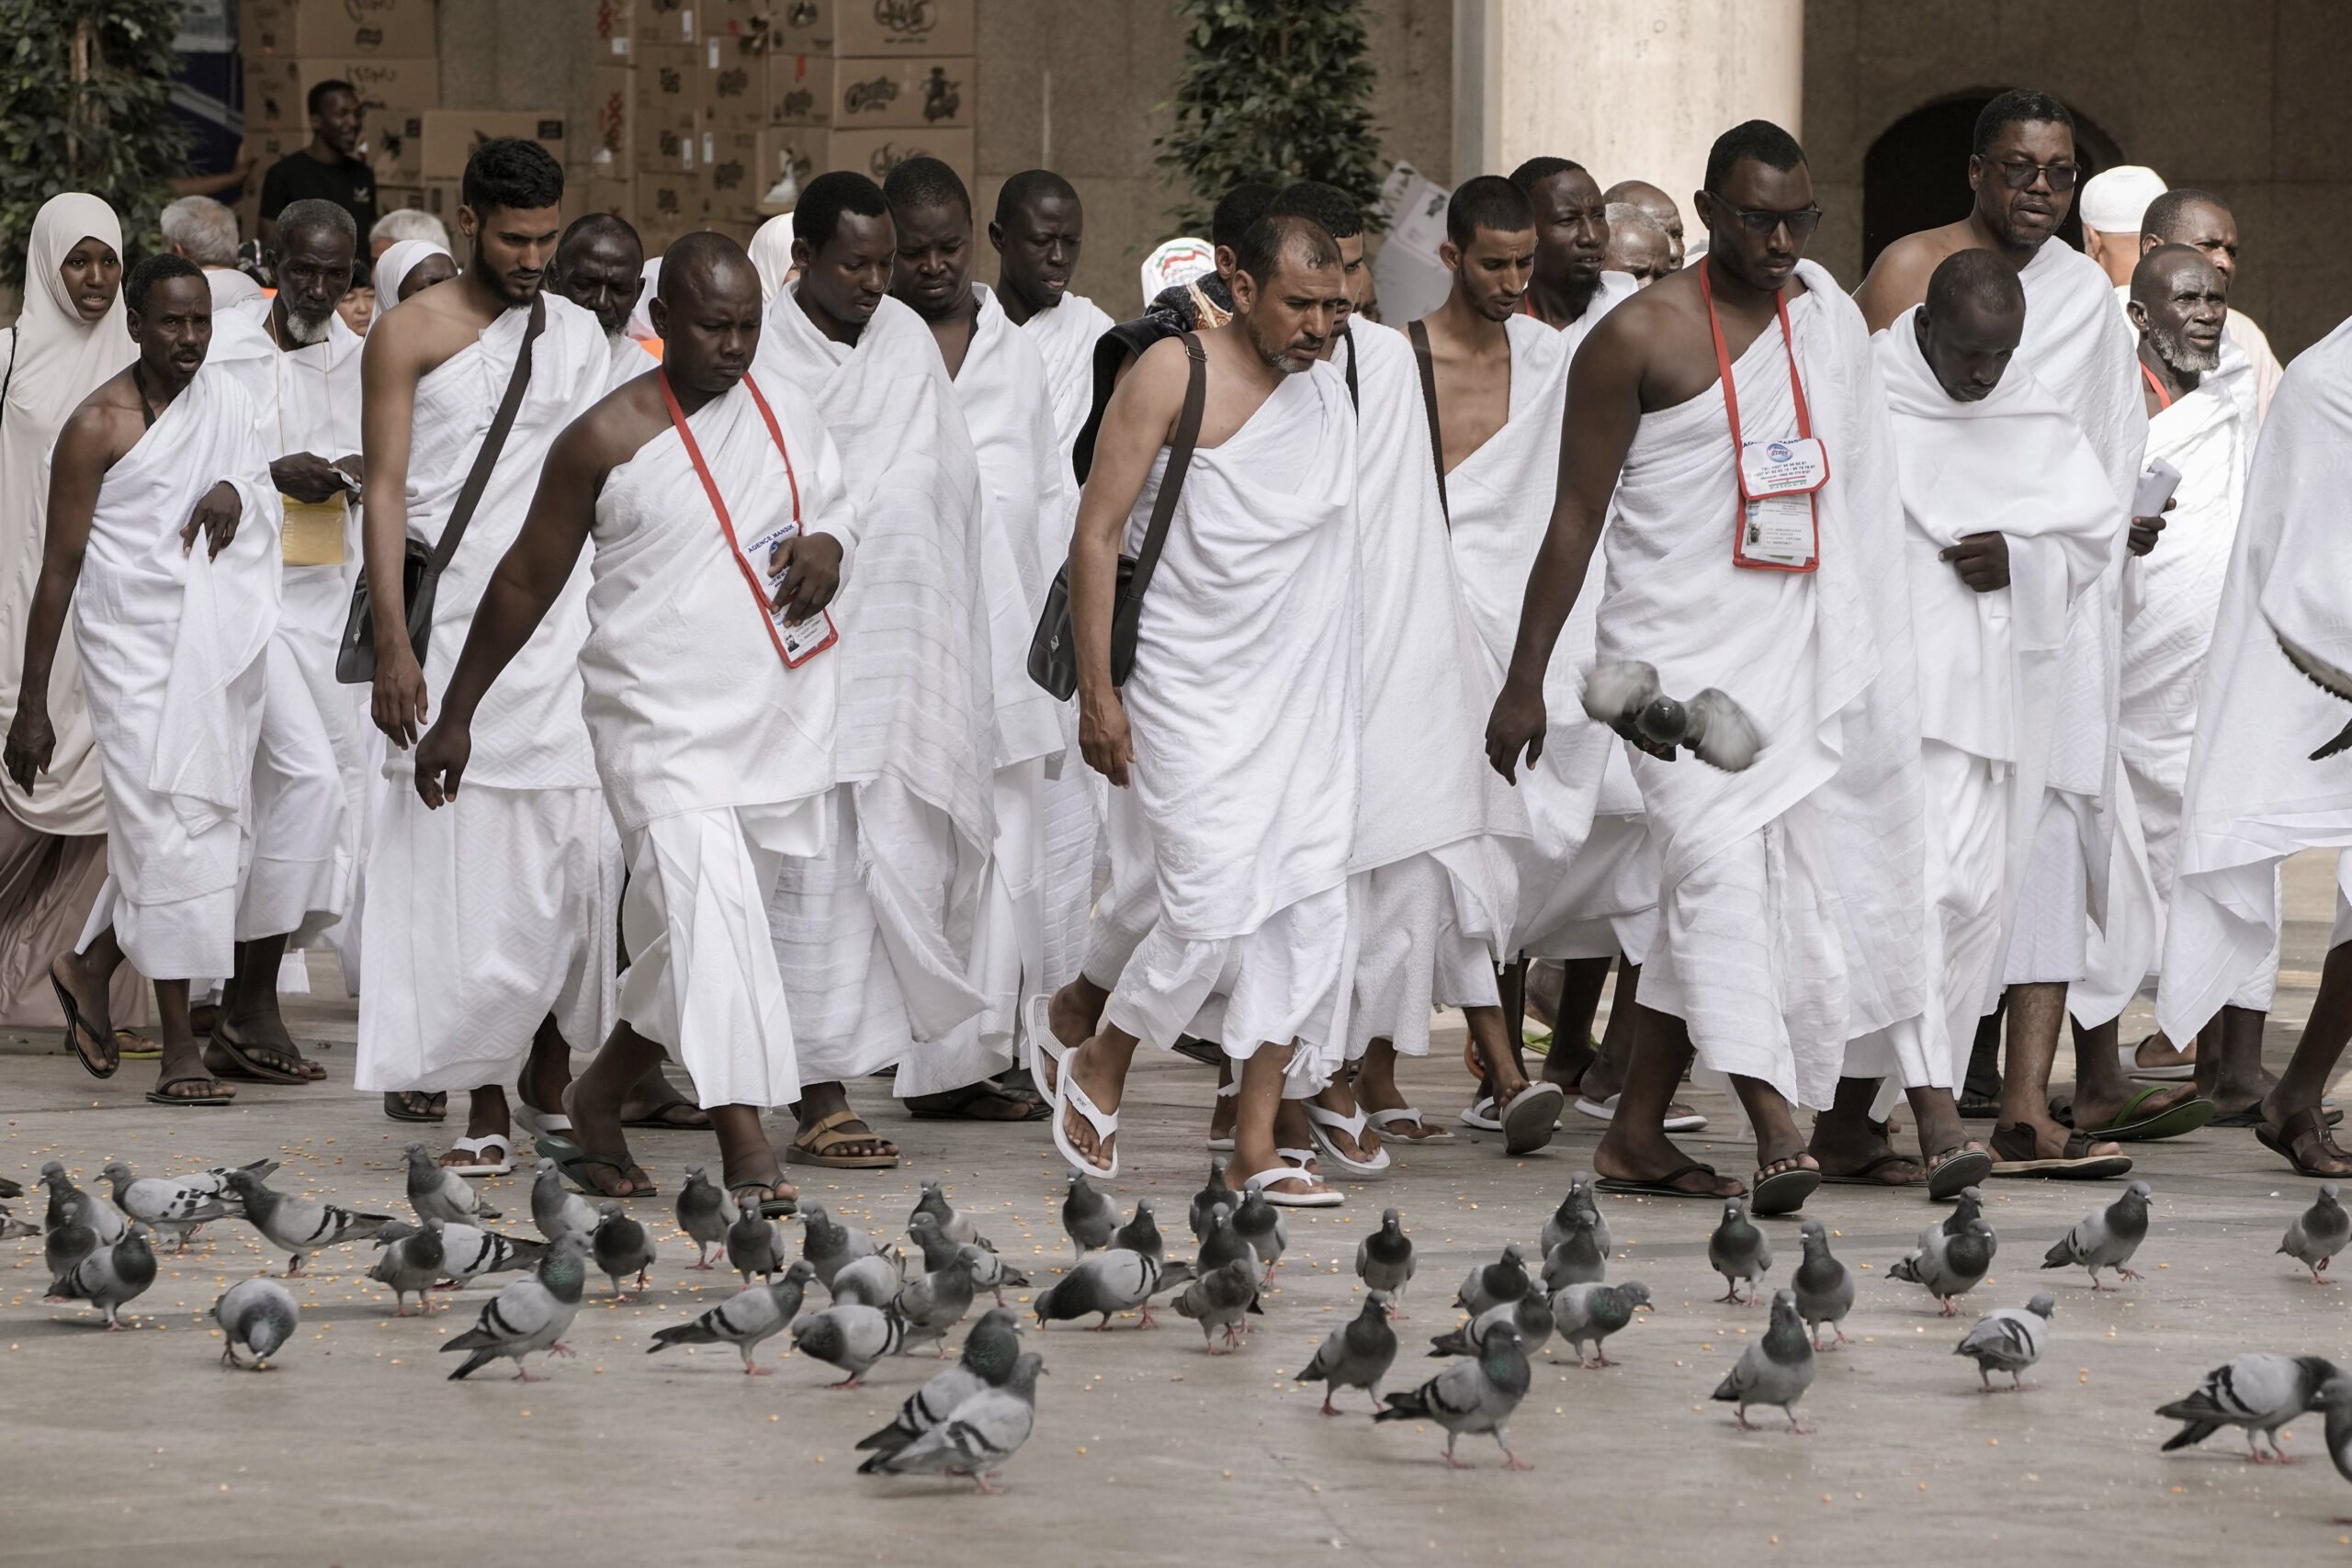 Pilgrims walk beside pigeons outside the Grand Mosque, during the annual hajj pilgrimage, in Mecca, Saudi Arabia, Saturday, June 24, 2023. Muslim pilgrims are converging on Saudi Arabia's holy city of Mecca for the largest hajj since the coronavirus pandemic severely curtailed access to one of Islam's five pillars. (AP Photo/Amr Nabil)